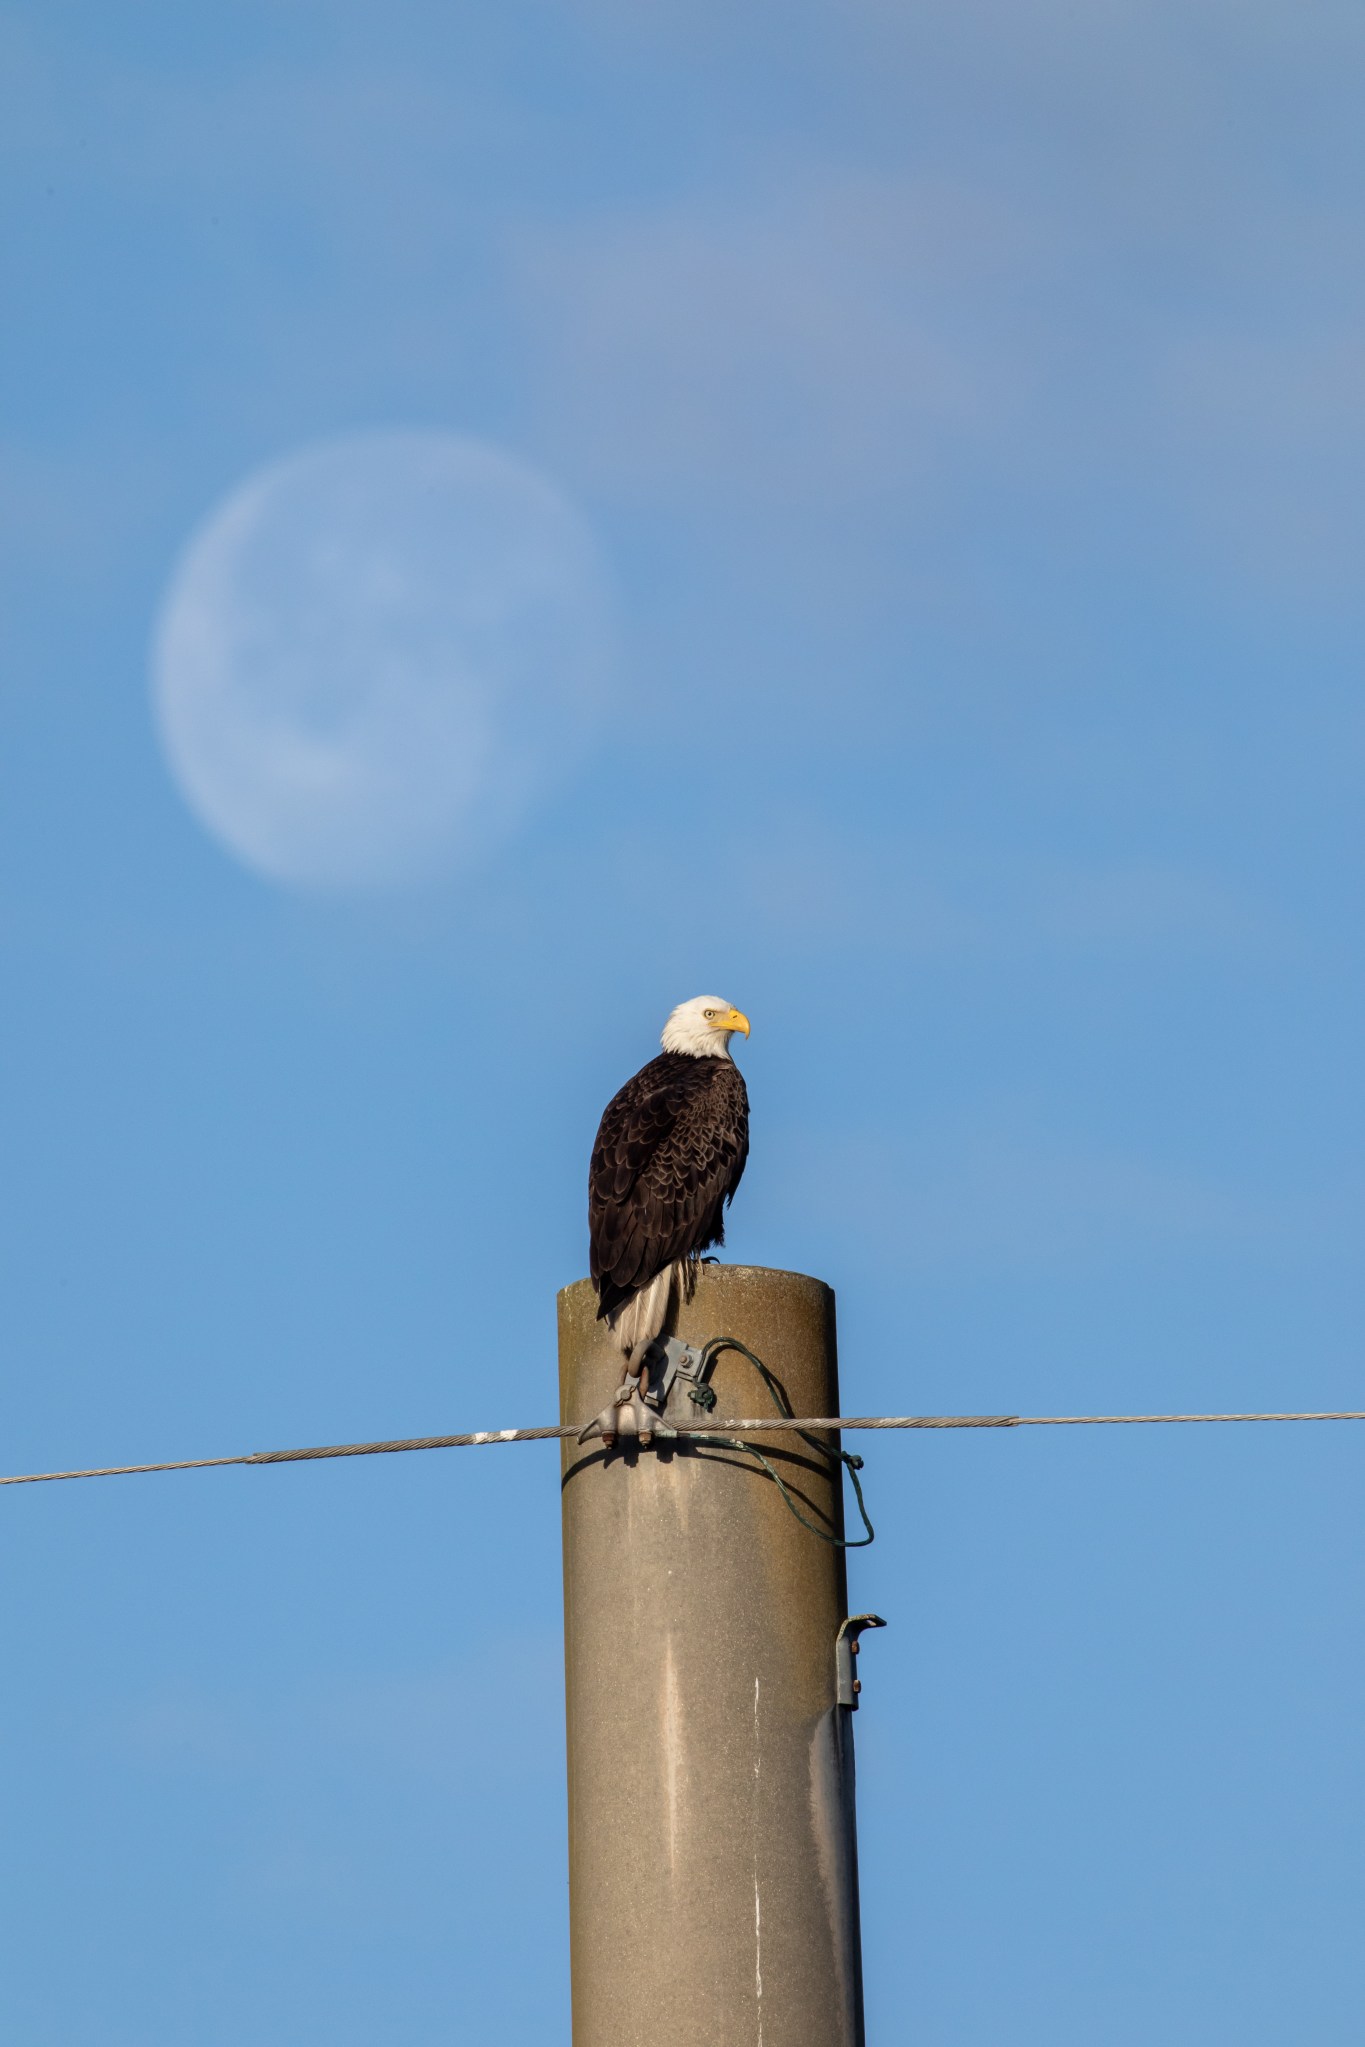 a bald eagle sits on top of a pole with a blue sky and the faint outline of the rising moon behind it 